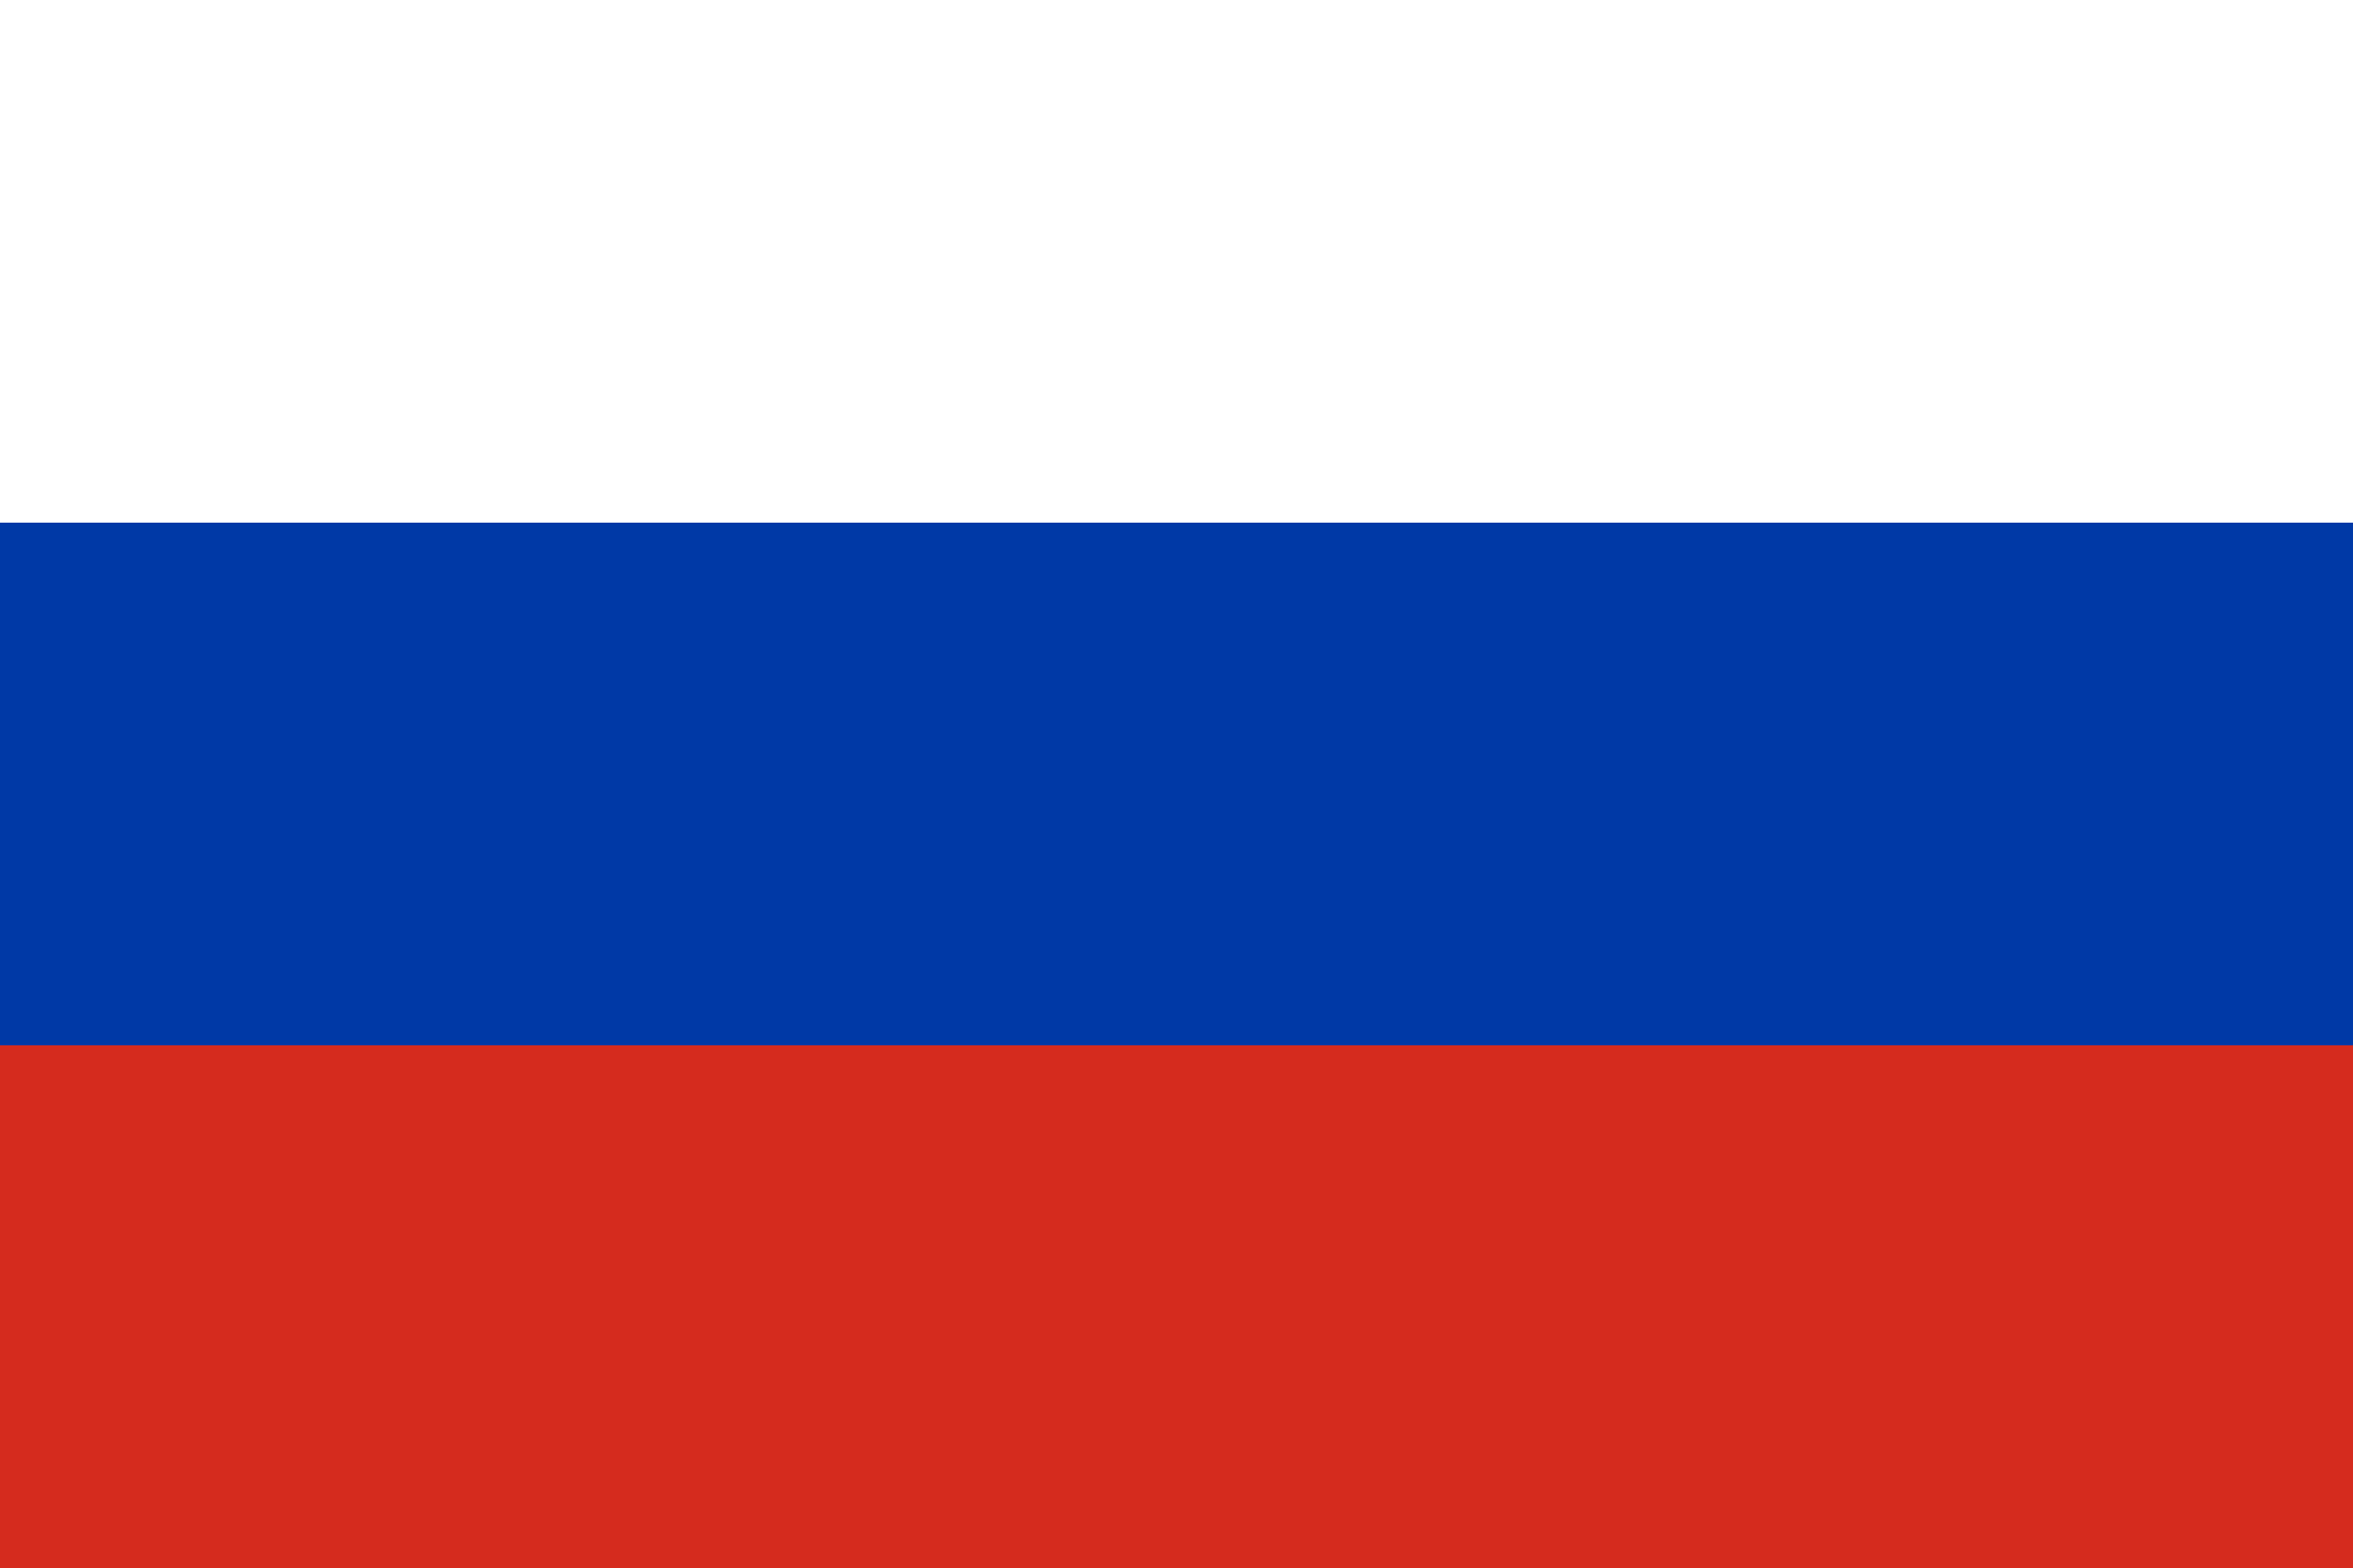 Free Russia Flag Documents: PDF, DOC, DOCX, HTML & More!